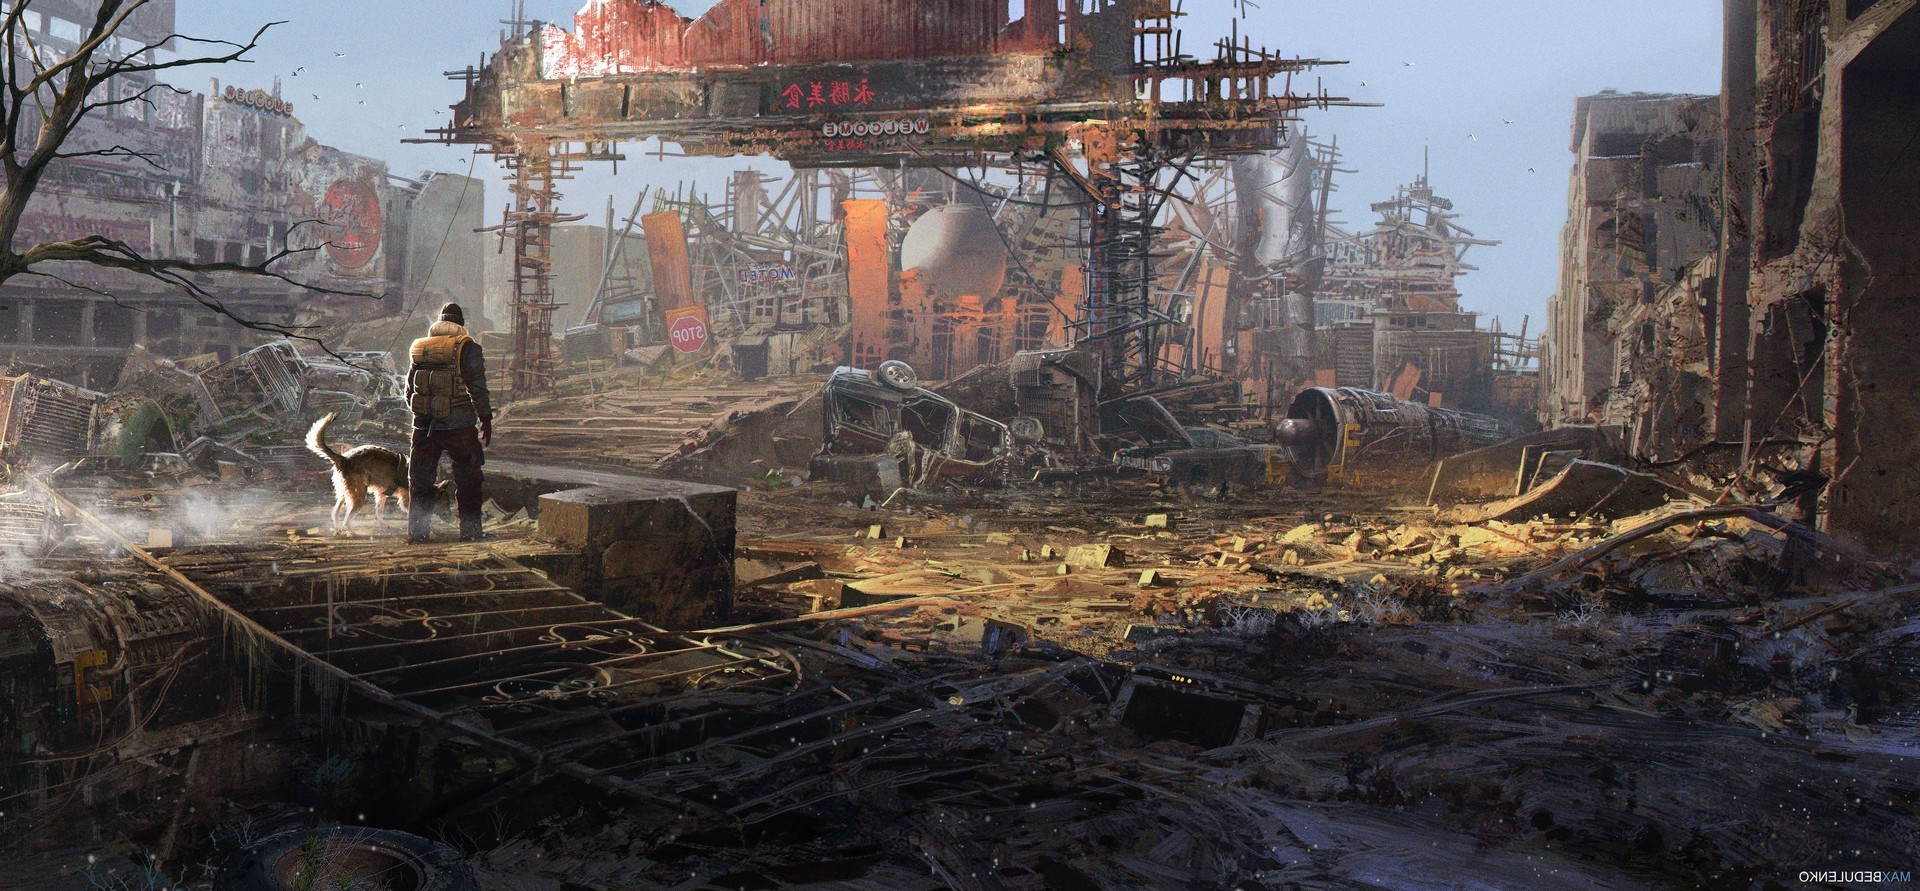 Wallpaper, men, ruin, dog, fire, explosion, ruins, destroyed, screenshot, pc game, geological phenomenon, 1920x891 px, end time 1920x891